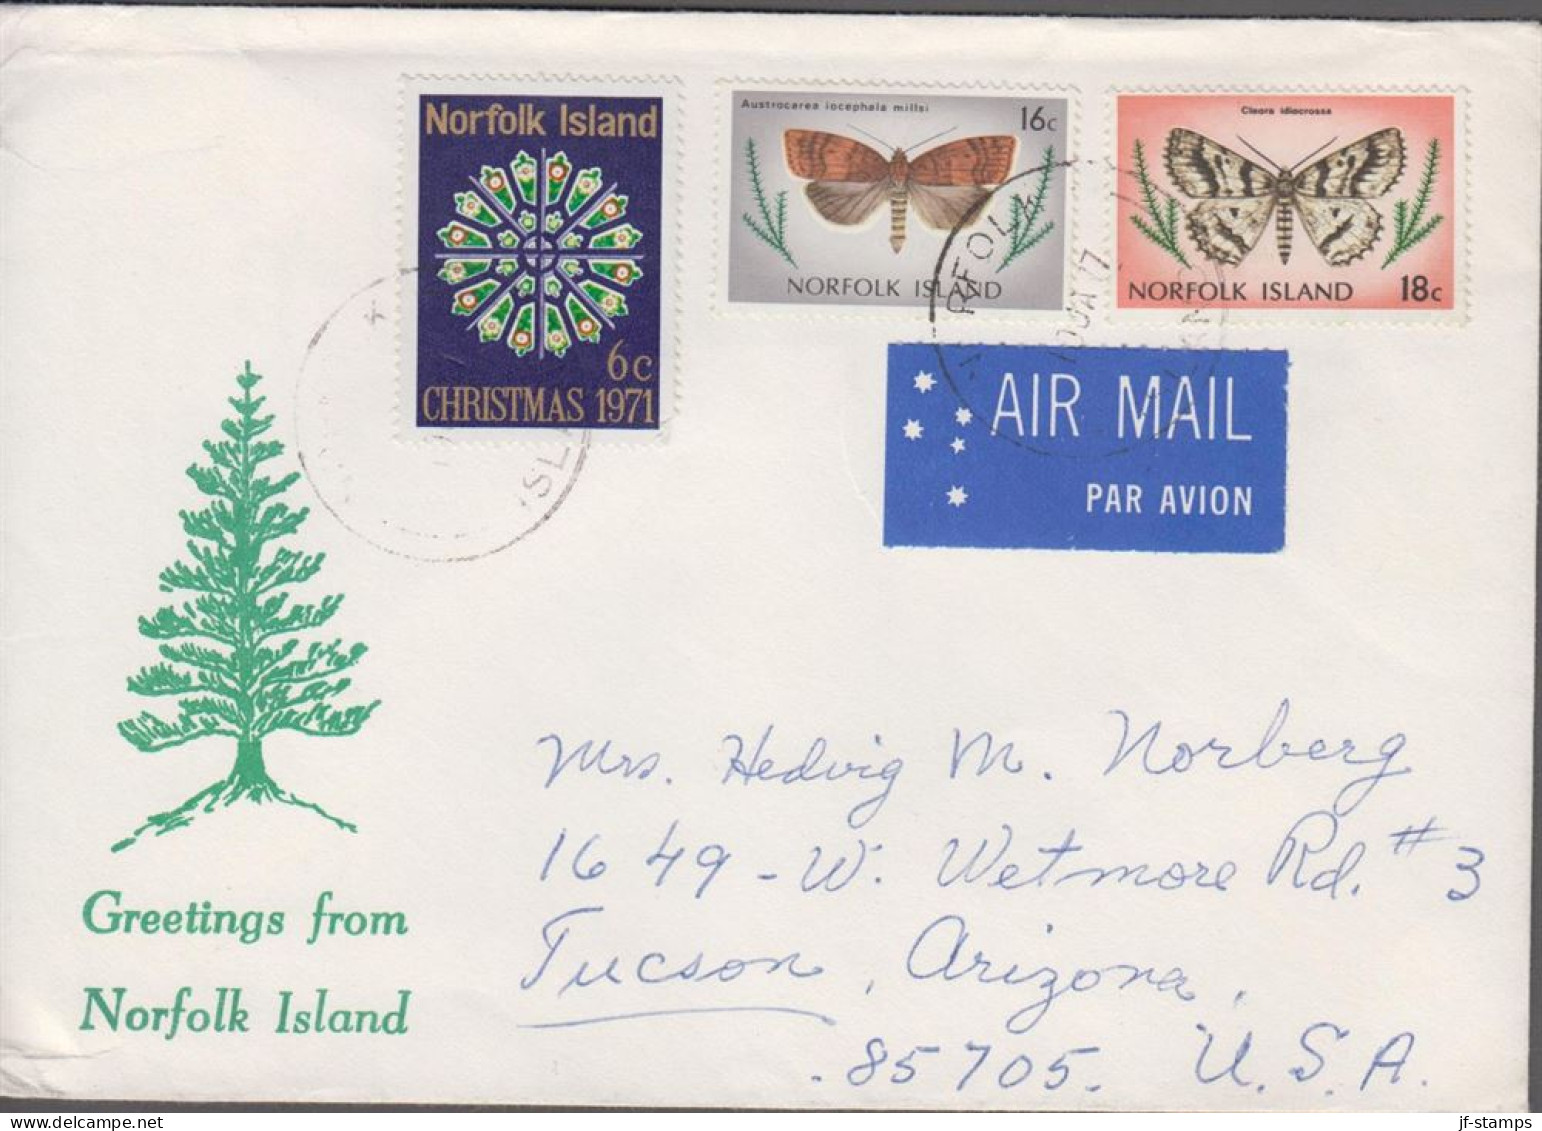 1977. NORFOLK ISLAND. 18 + 16 C Butterfly + 6 C Christmas On Cover To Tucon, Arizona, USA. A... (MICHEL 193+) - JF543160 - Norfolk Island